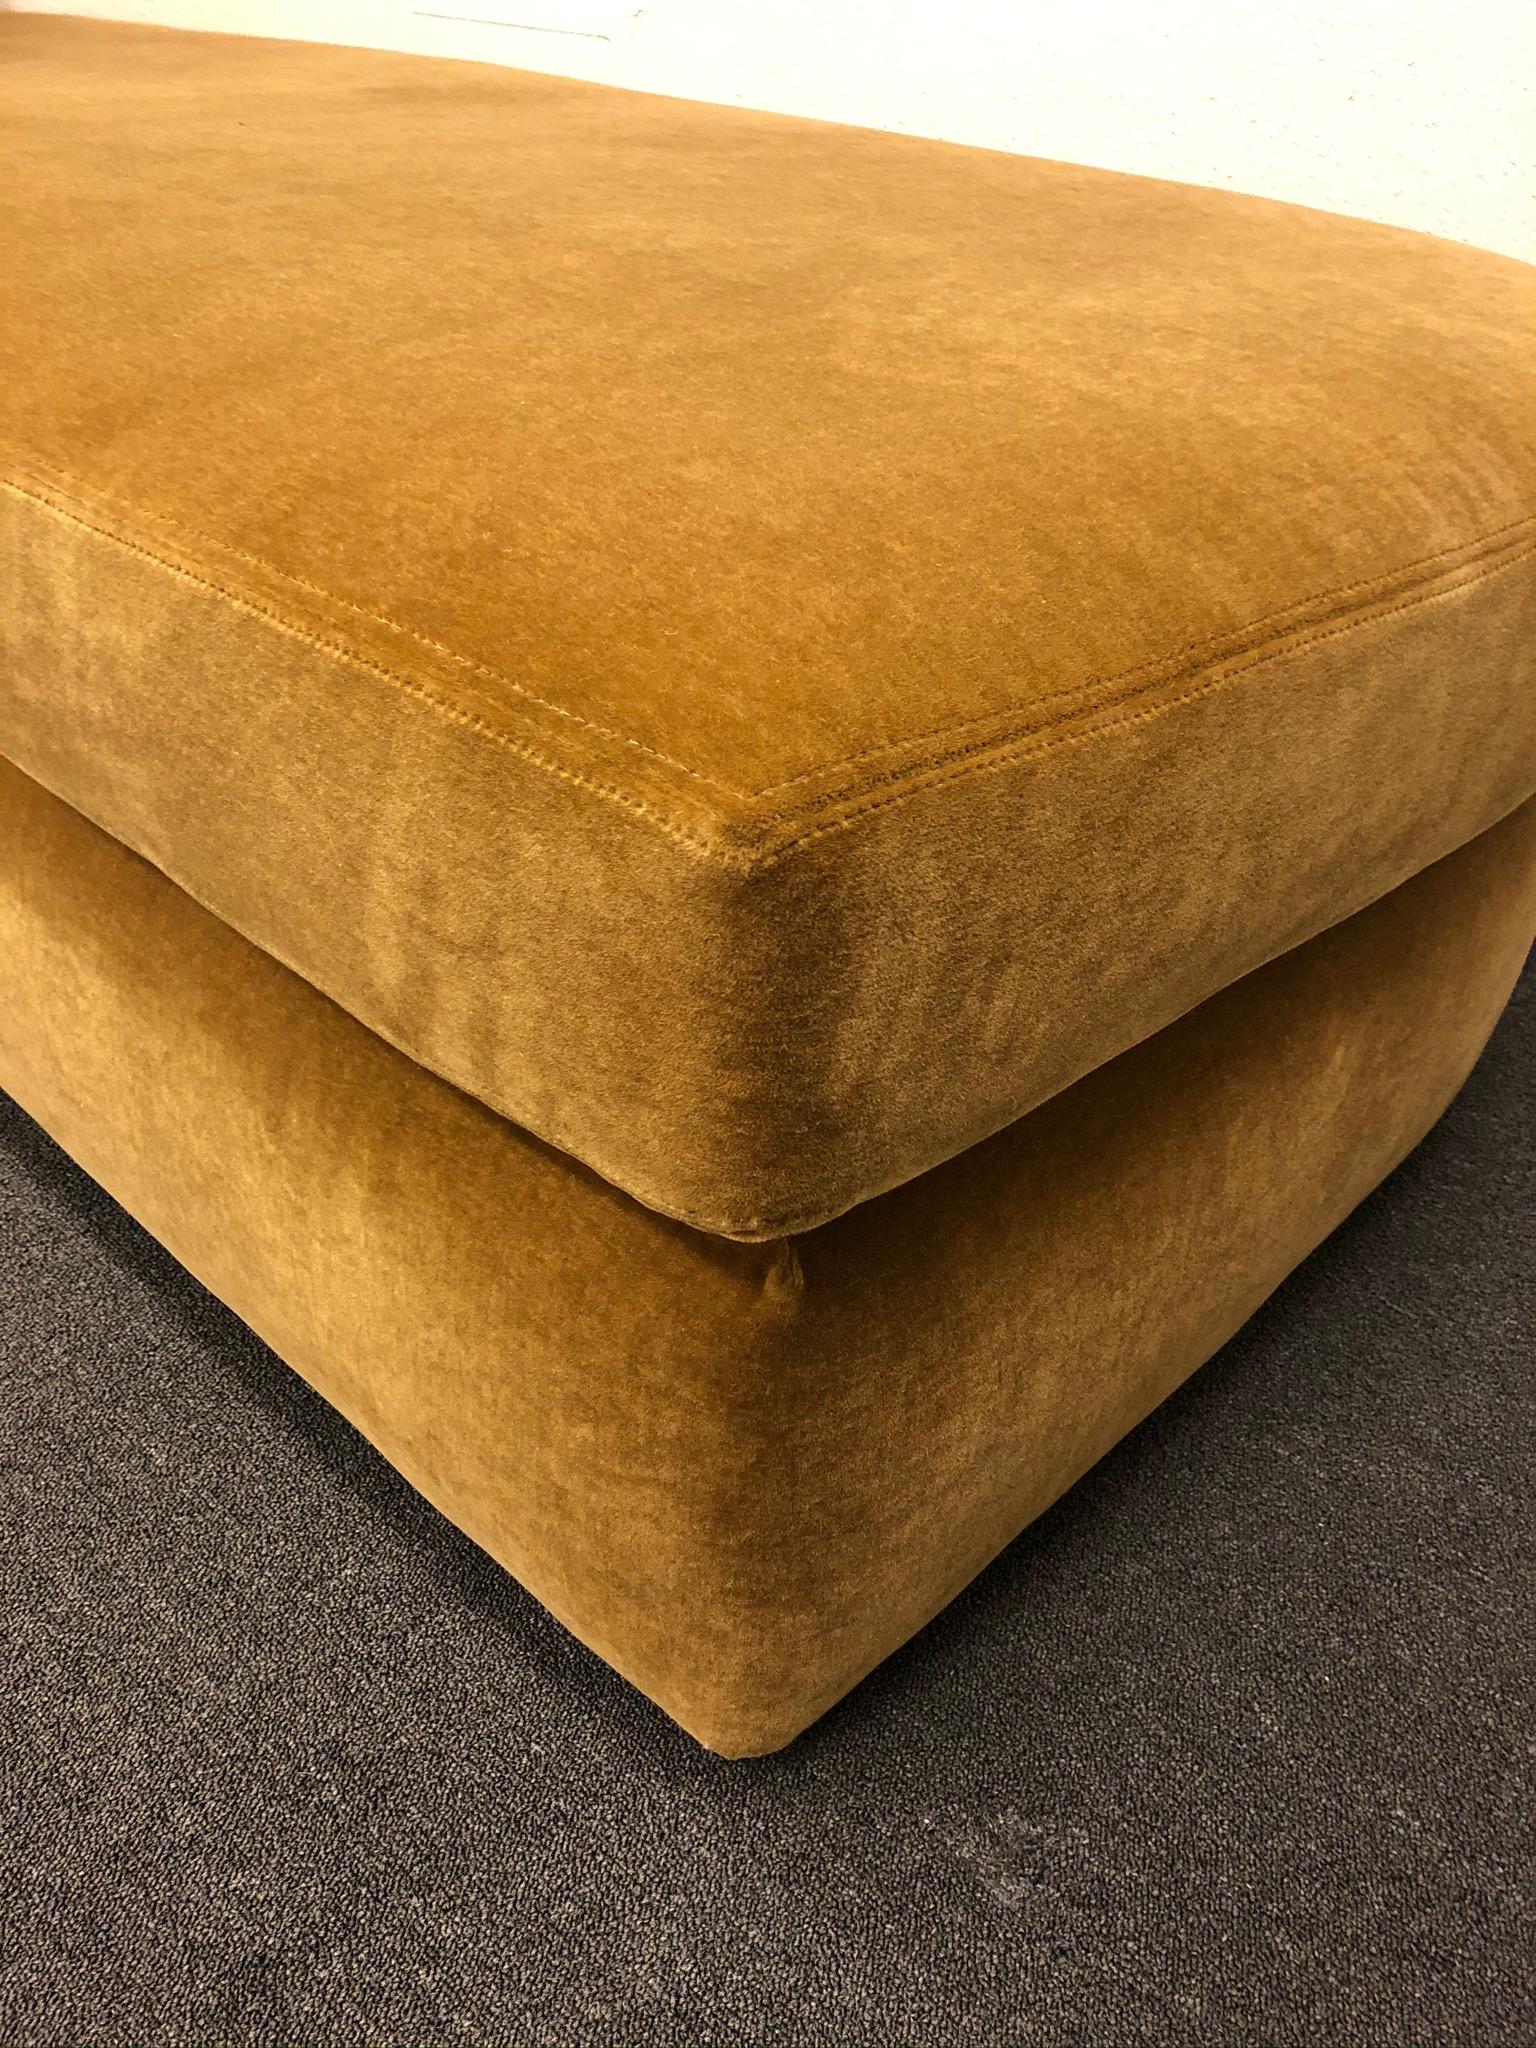 Gold Mohair Chaise by Steve Chase 2